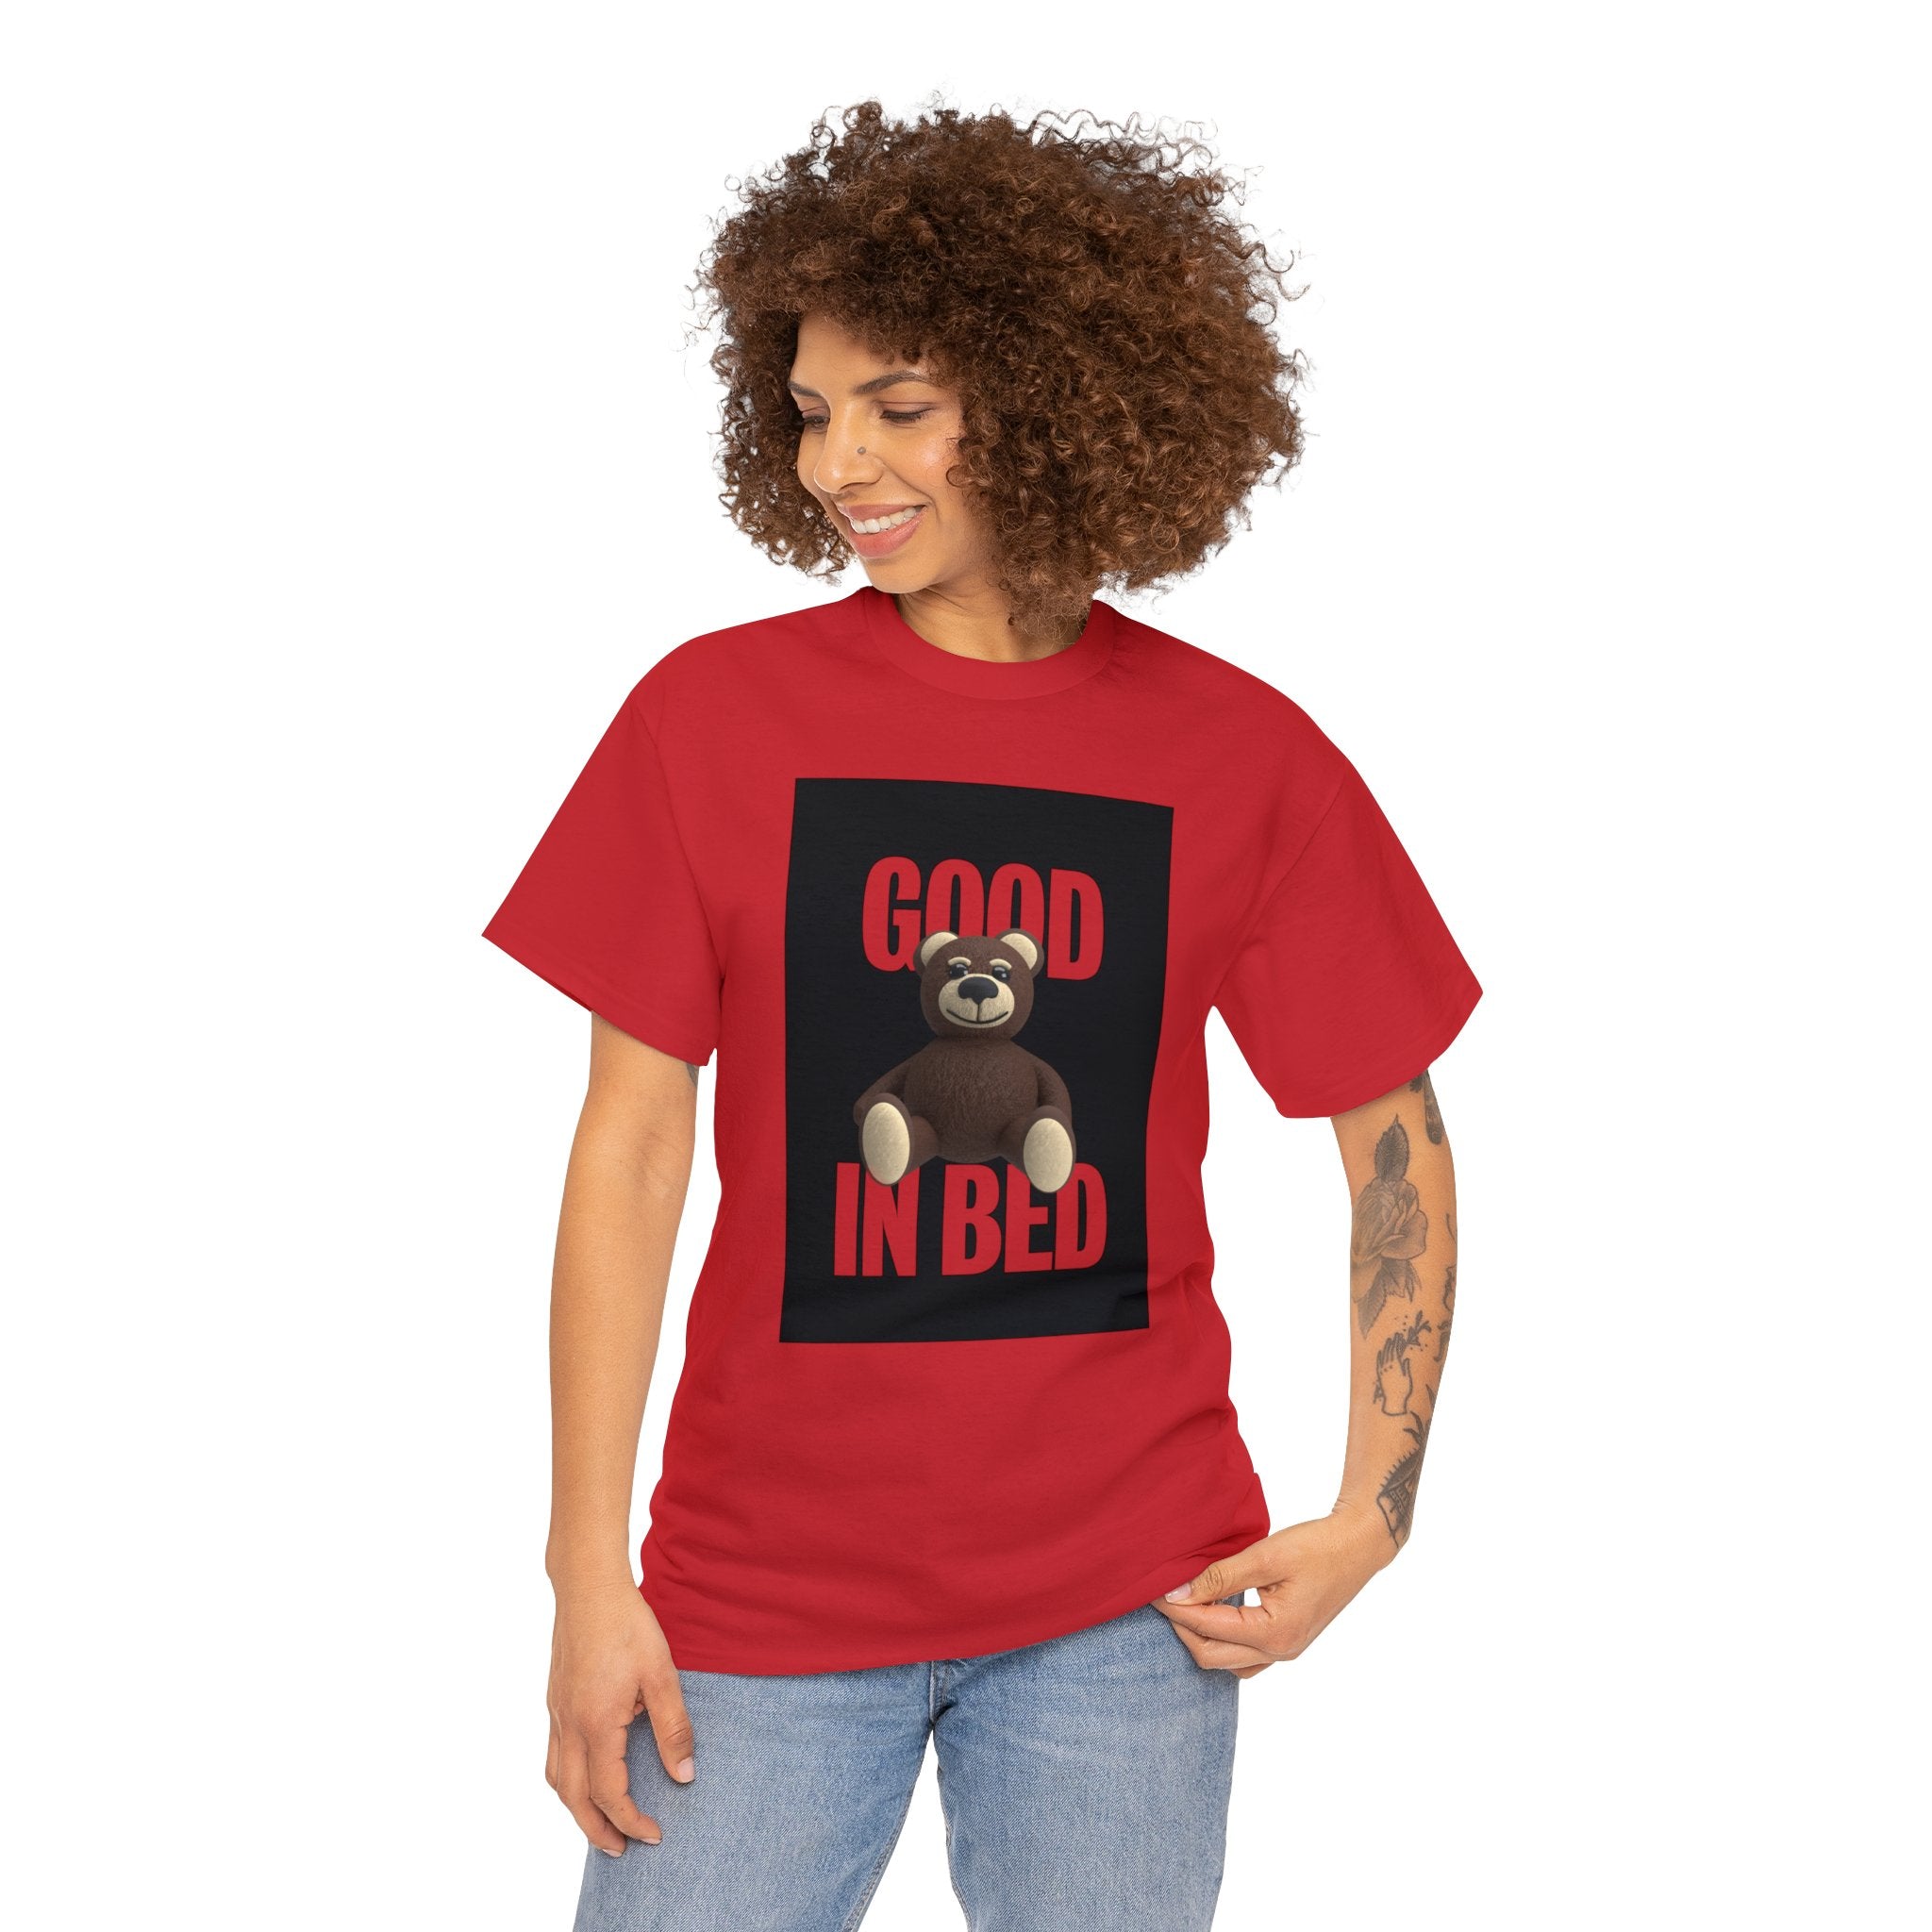 good in bed t shirt